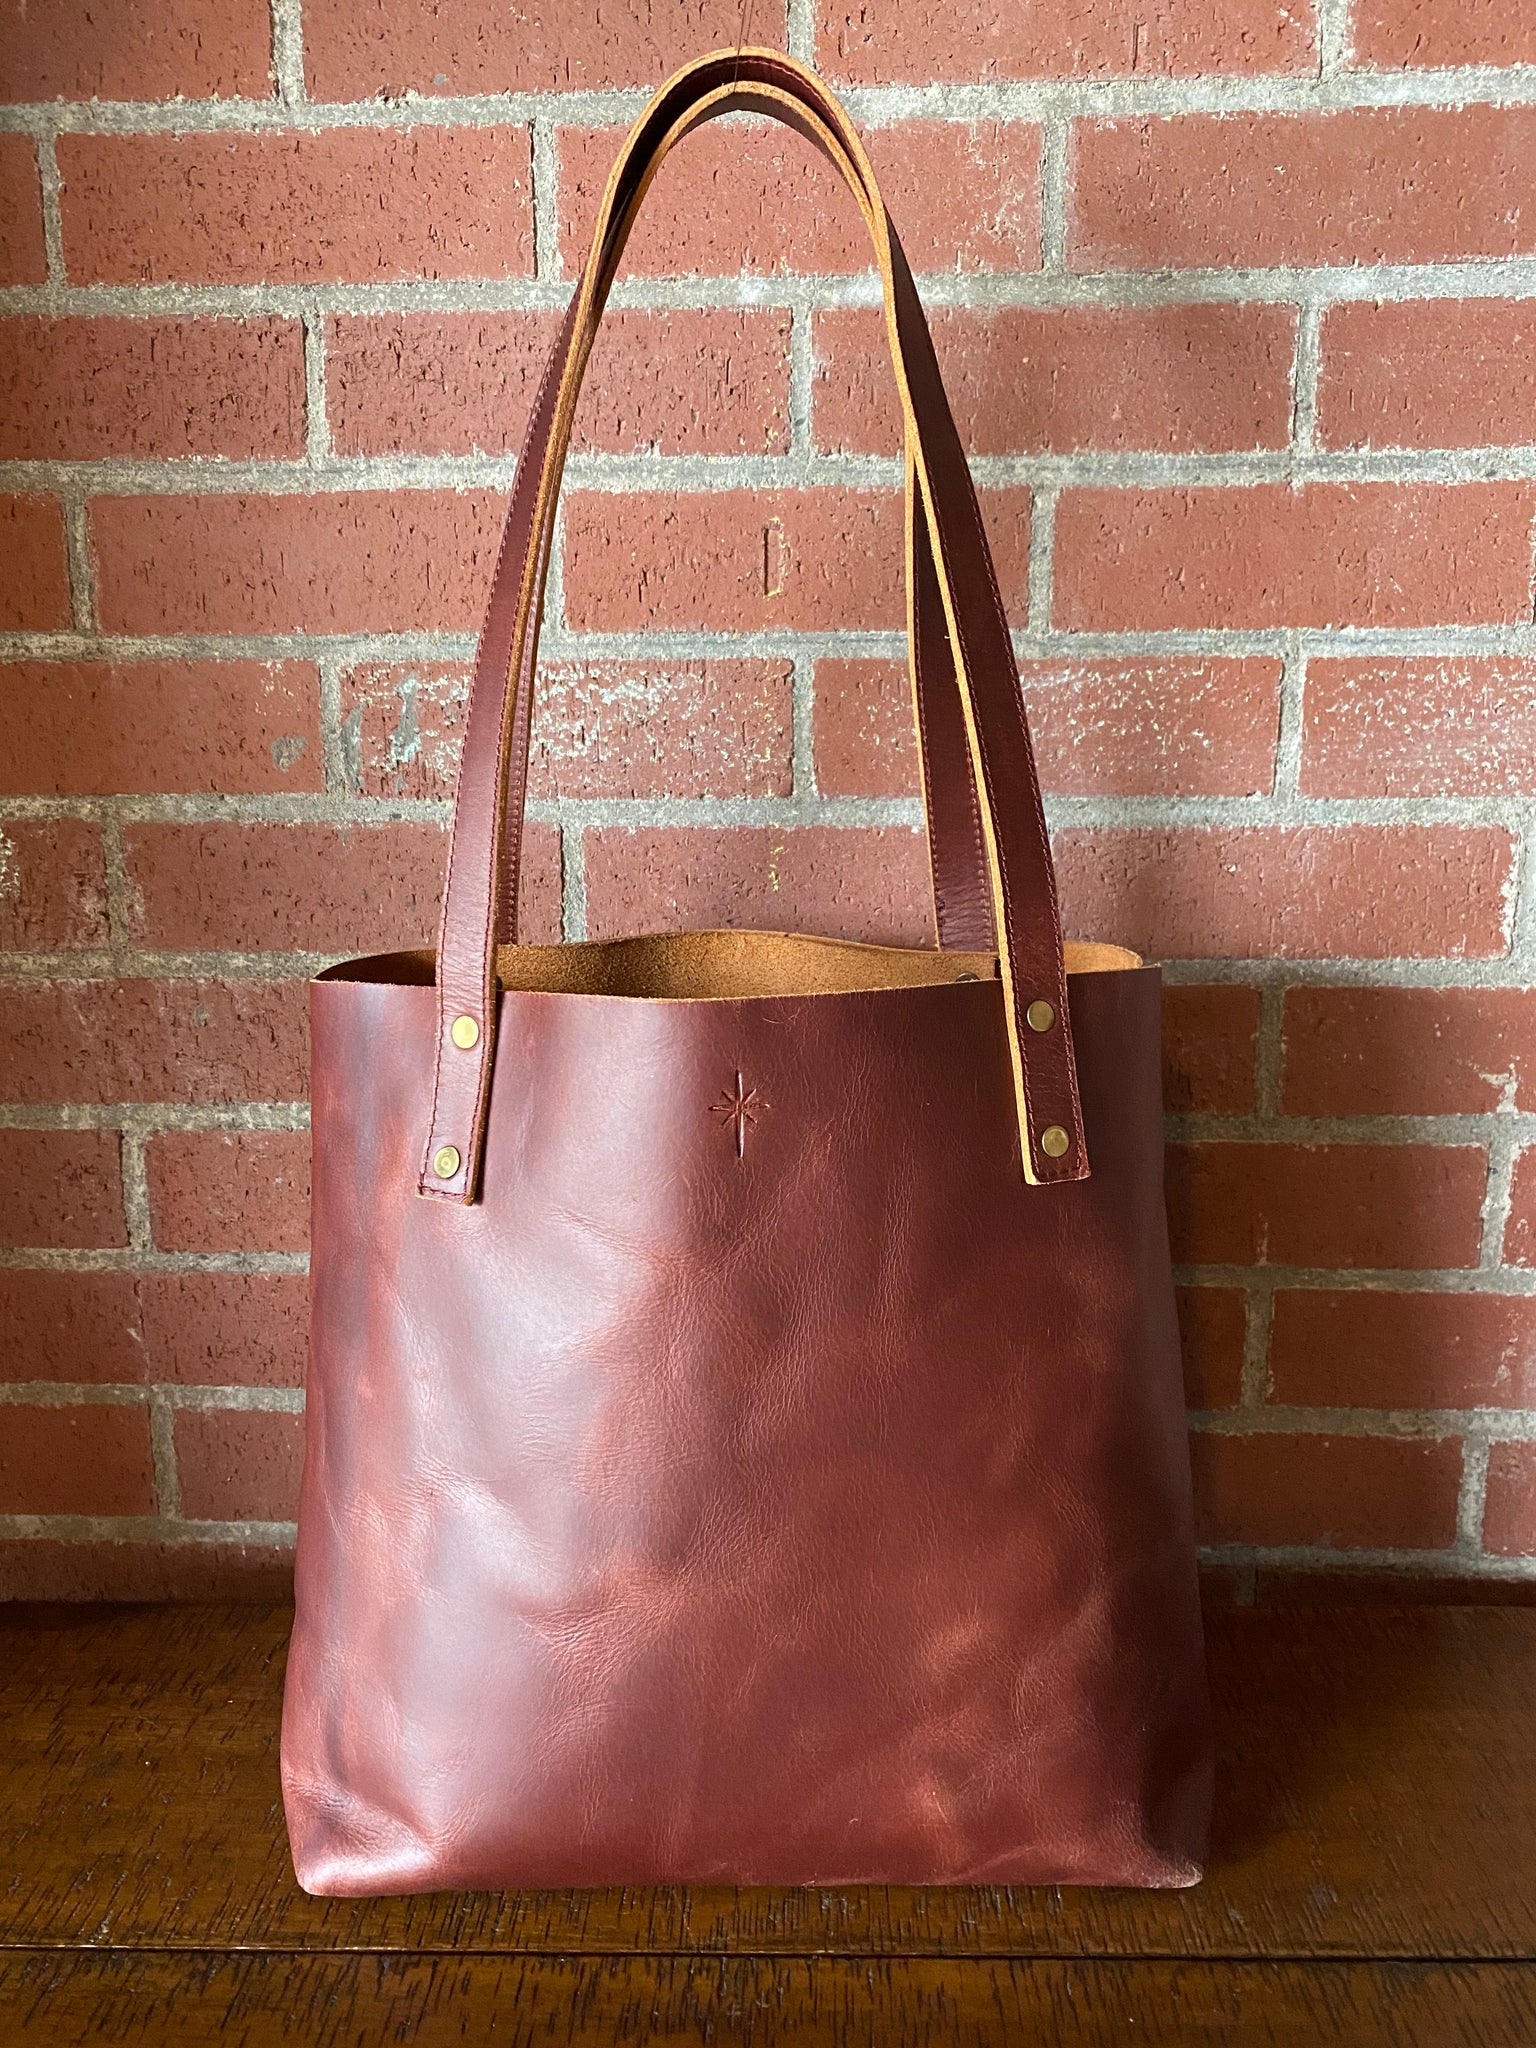 Brown leather tote back with 10.5 inch drop handles with two straps